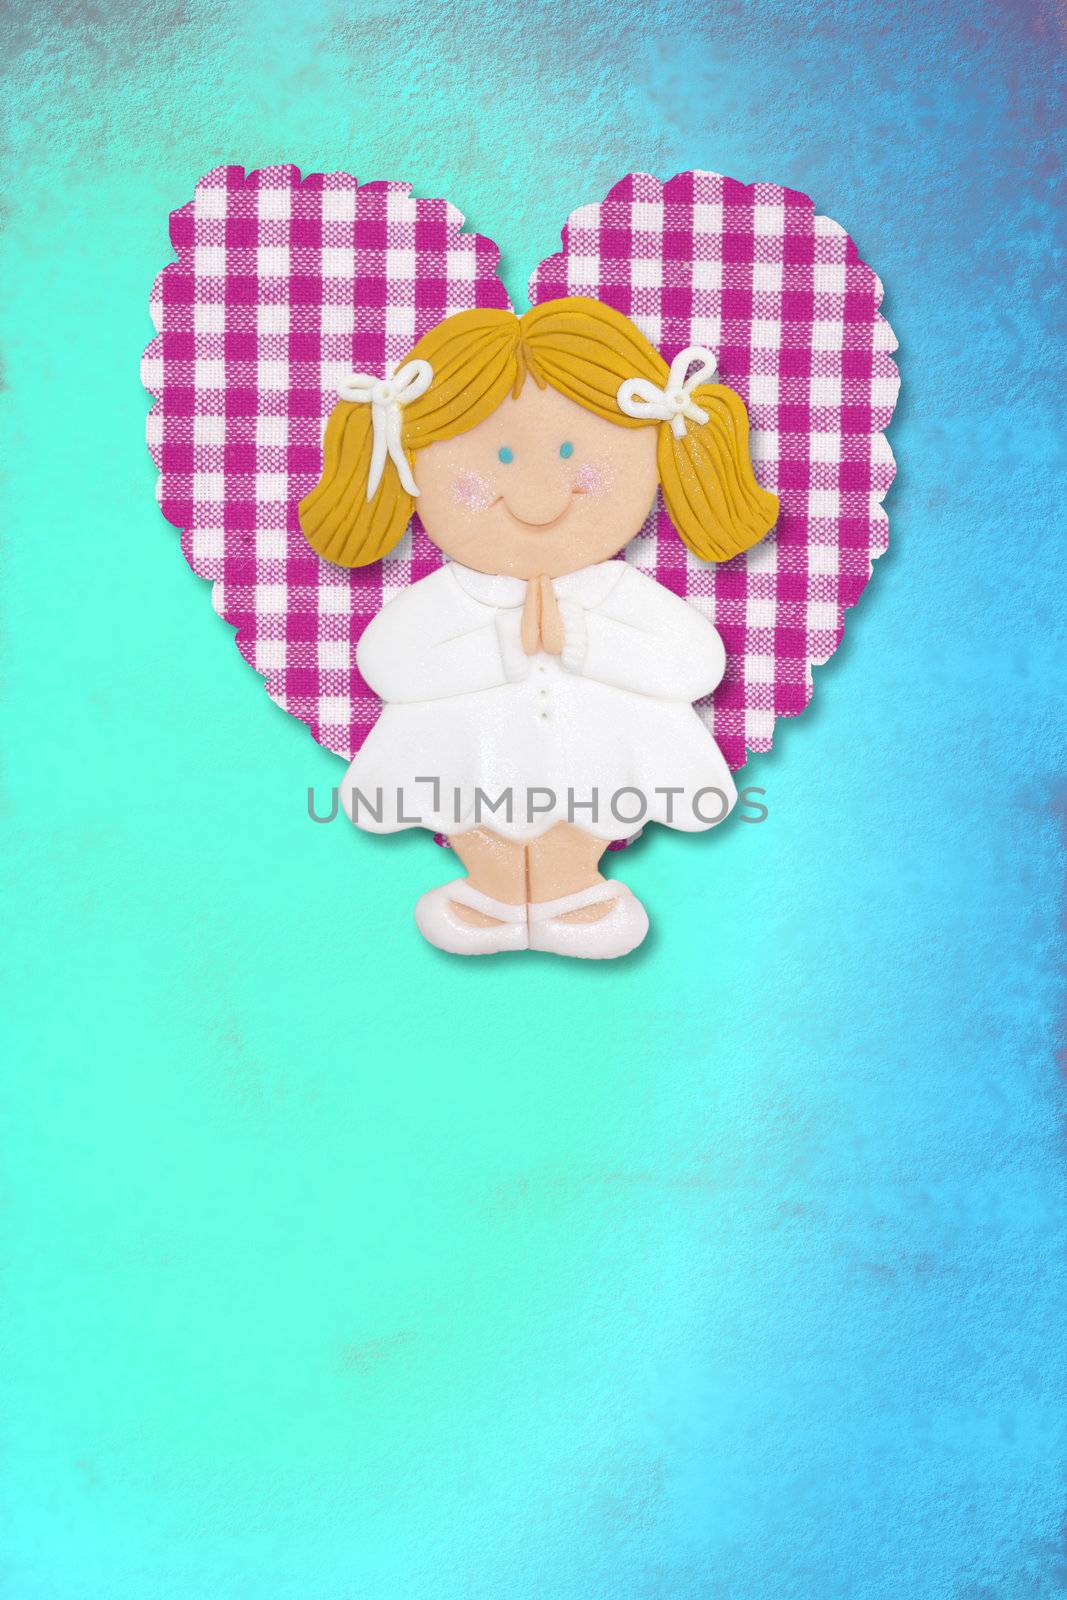 First Holy Communion Invitation Card, cute blond girl by Carche